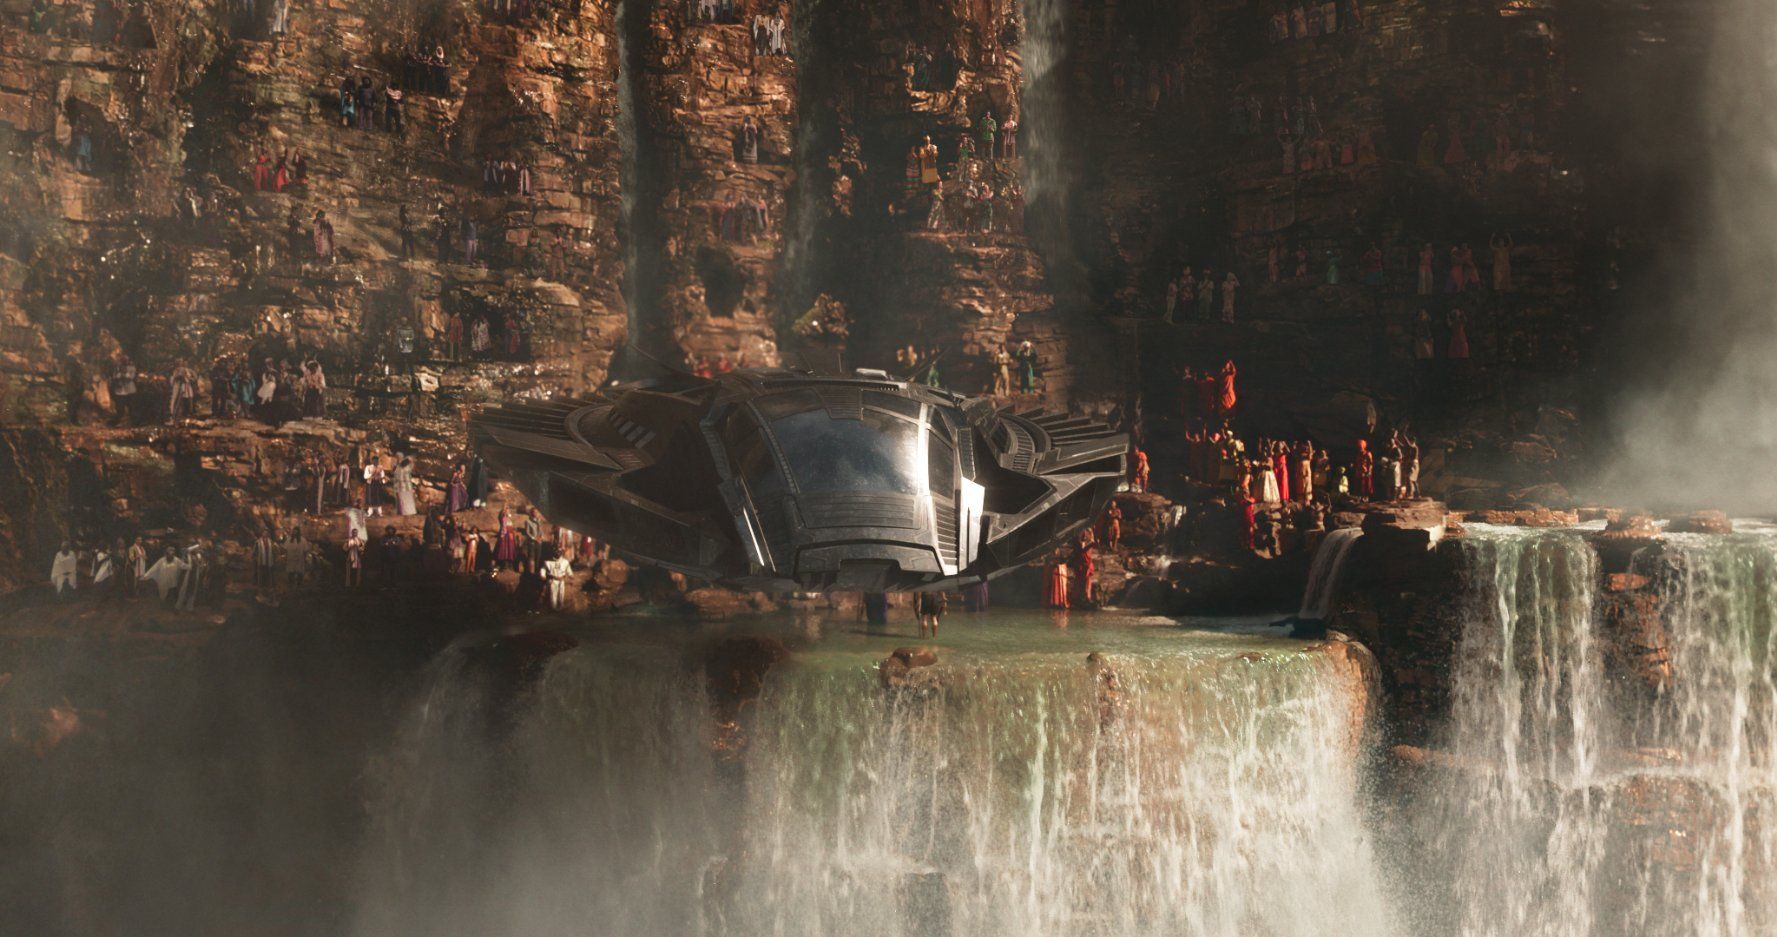 Many people gathered alongside a waterfall as a spacecraft hovers